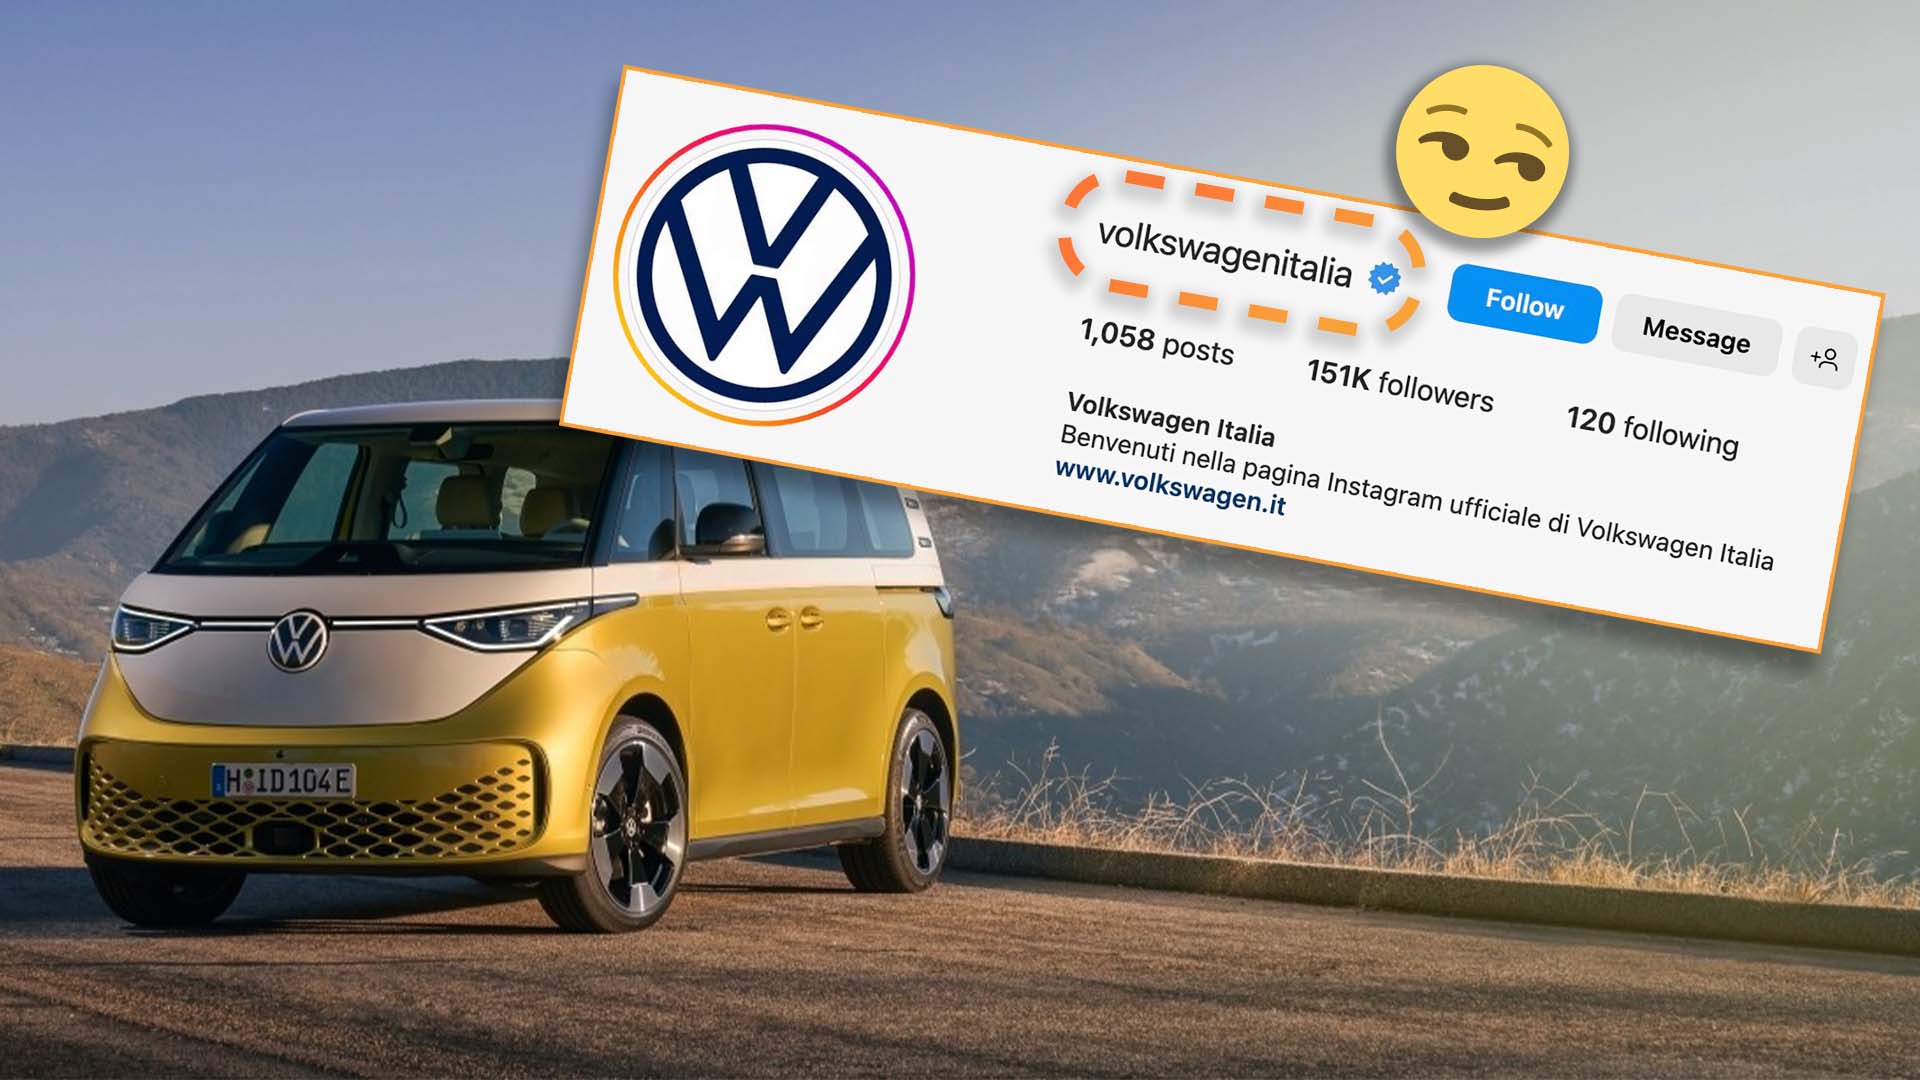 Yes, VW Italy Knows Its Instagram Handle Says ‘Genitalia’